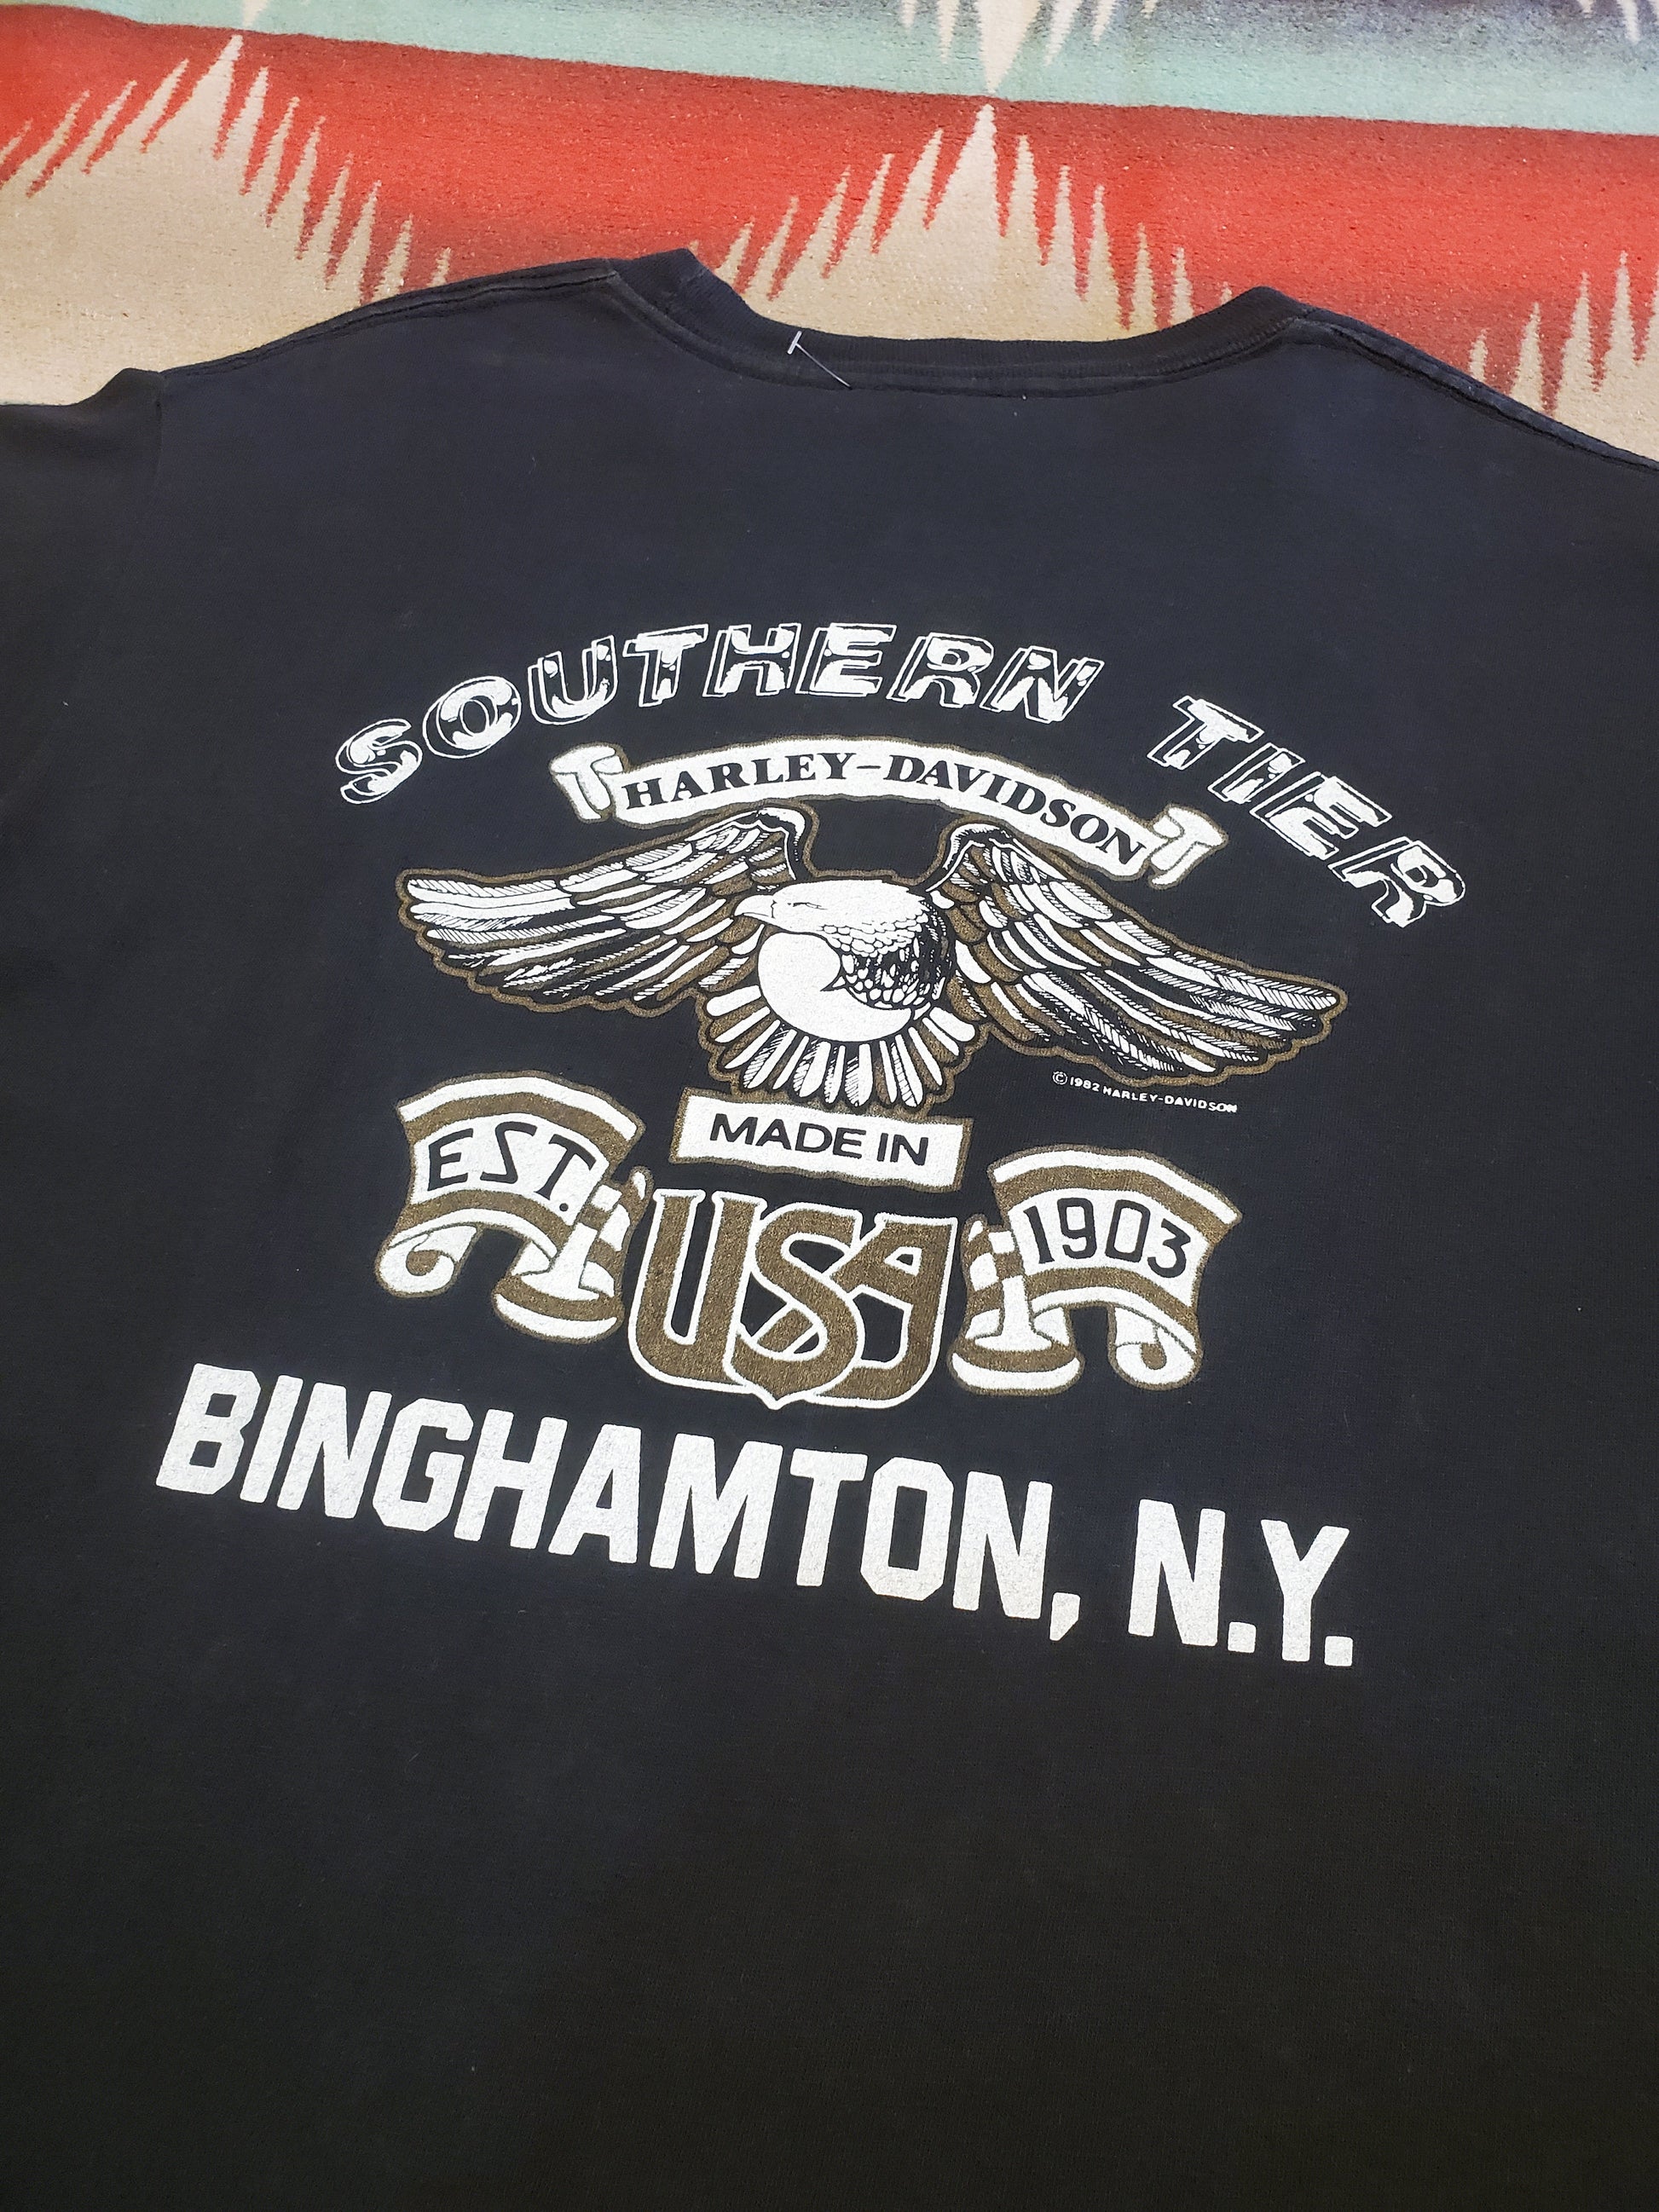 1980s 1986 Holoubek Statue of Liberty Binghamton New York Harley Davidson T-Shirt Made in USA Size L